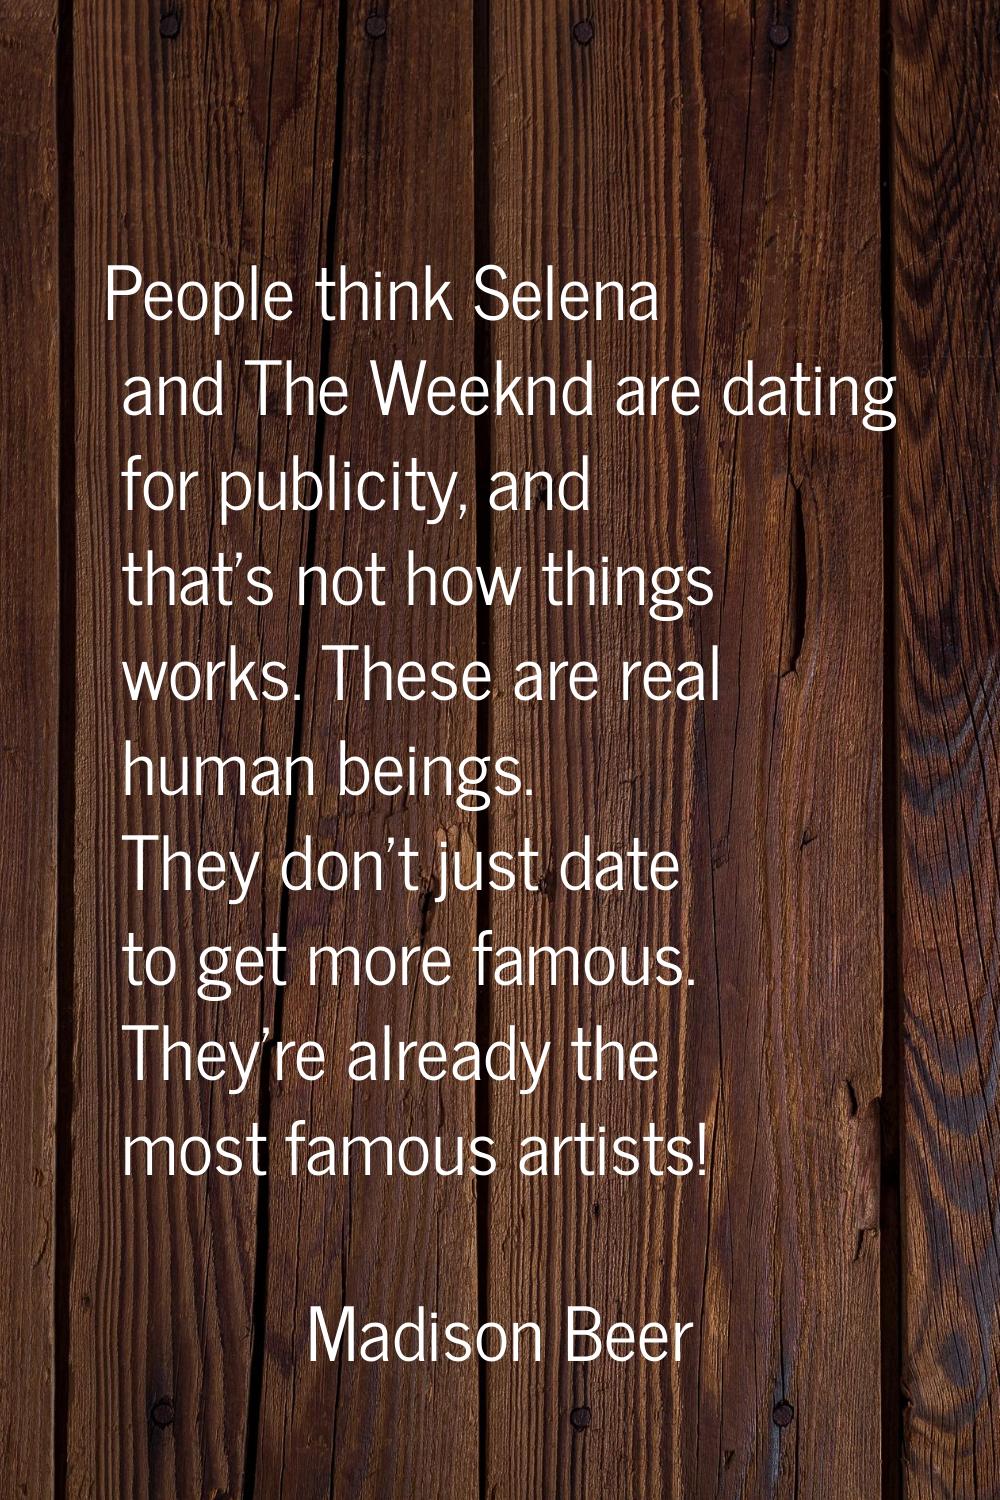 People think Selena and The Weeknd are dating for publicity, and that's not how things works. These